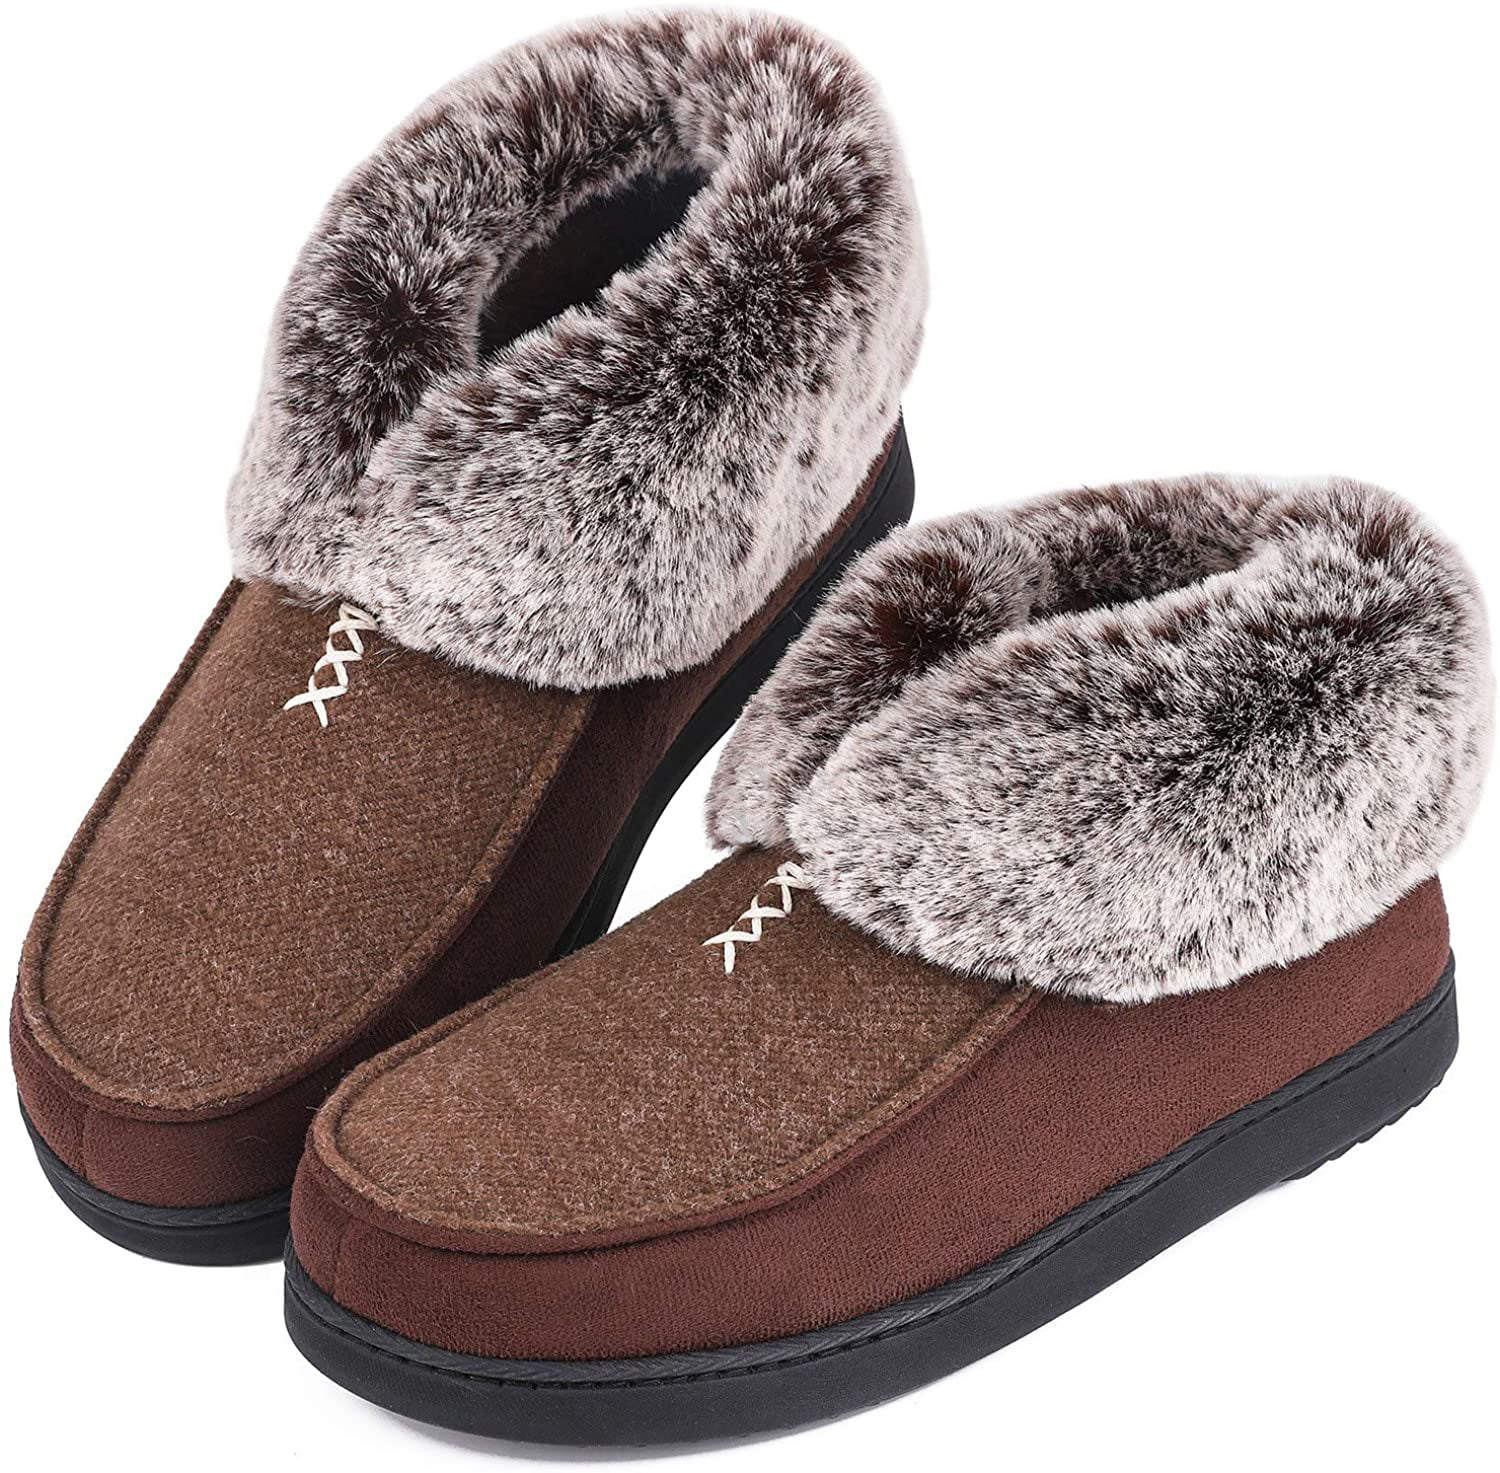 slippers with non skid soles